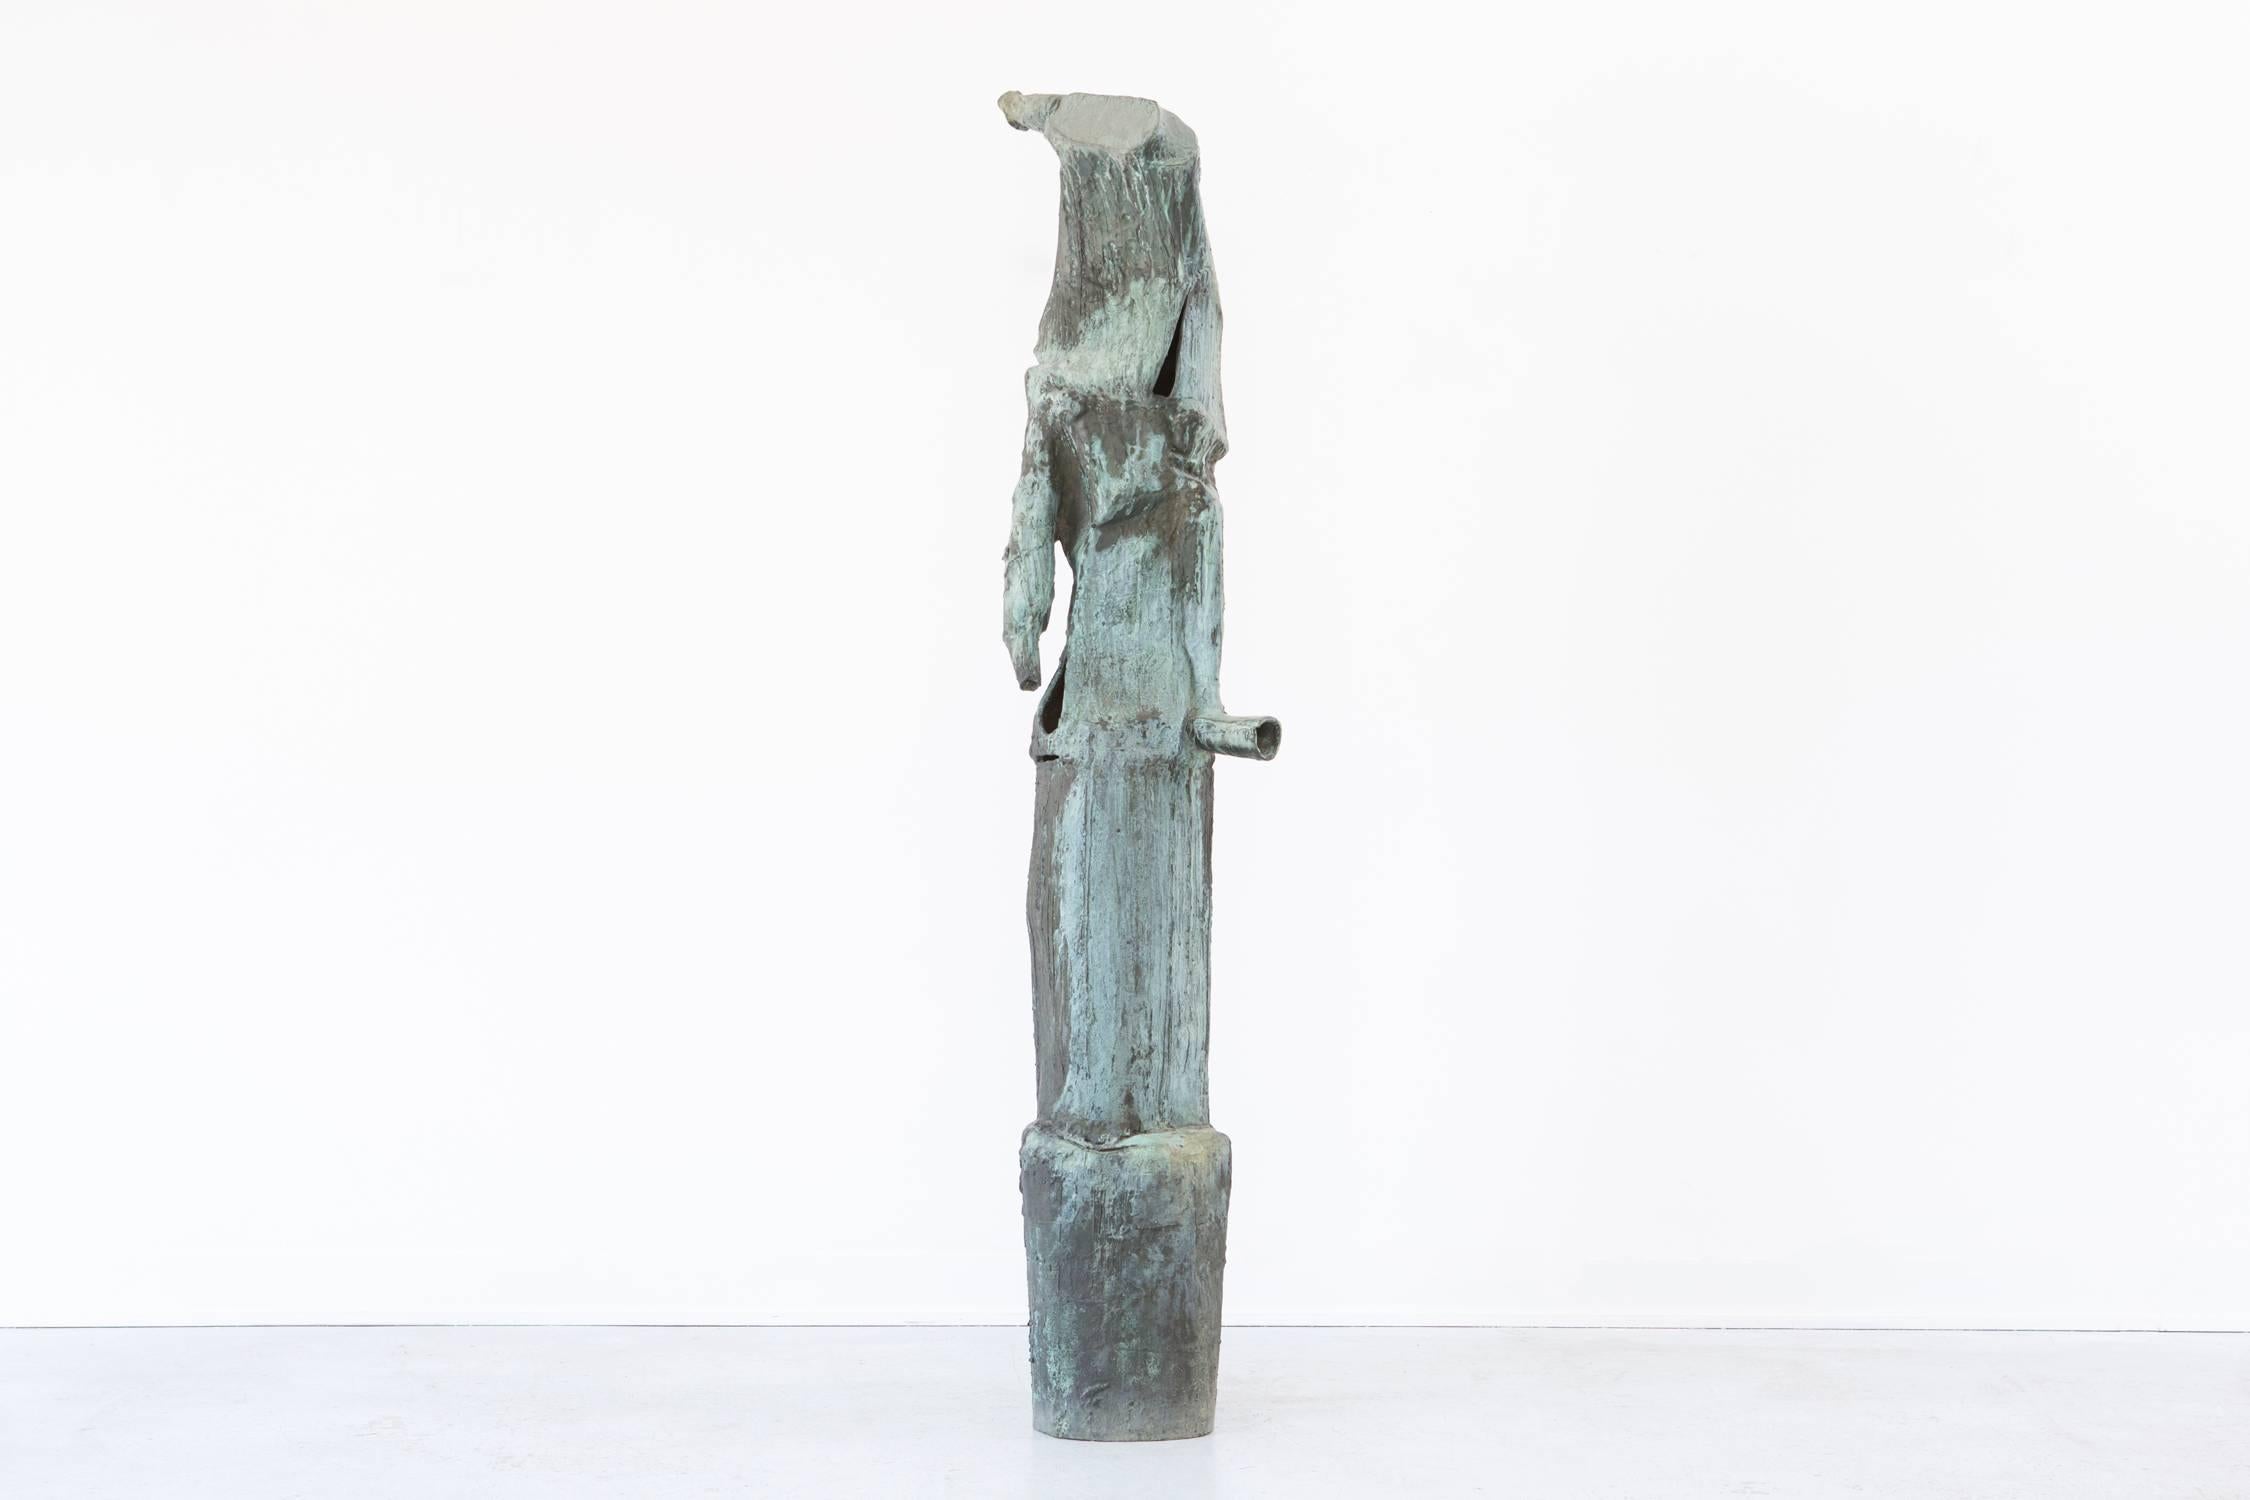 American 1960's Monumental Brutalist Stan Mock Sculpture Standing 6 Feet Tall  For Sale